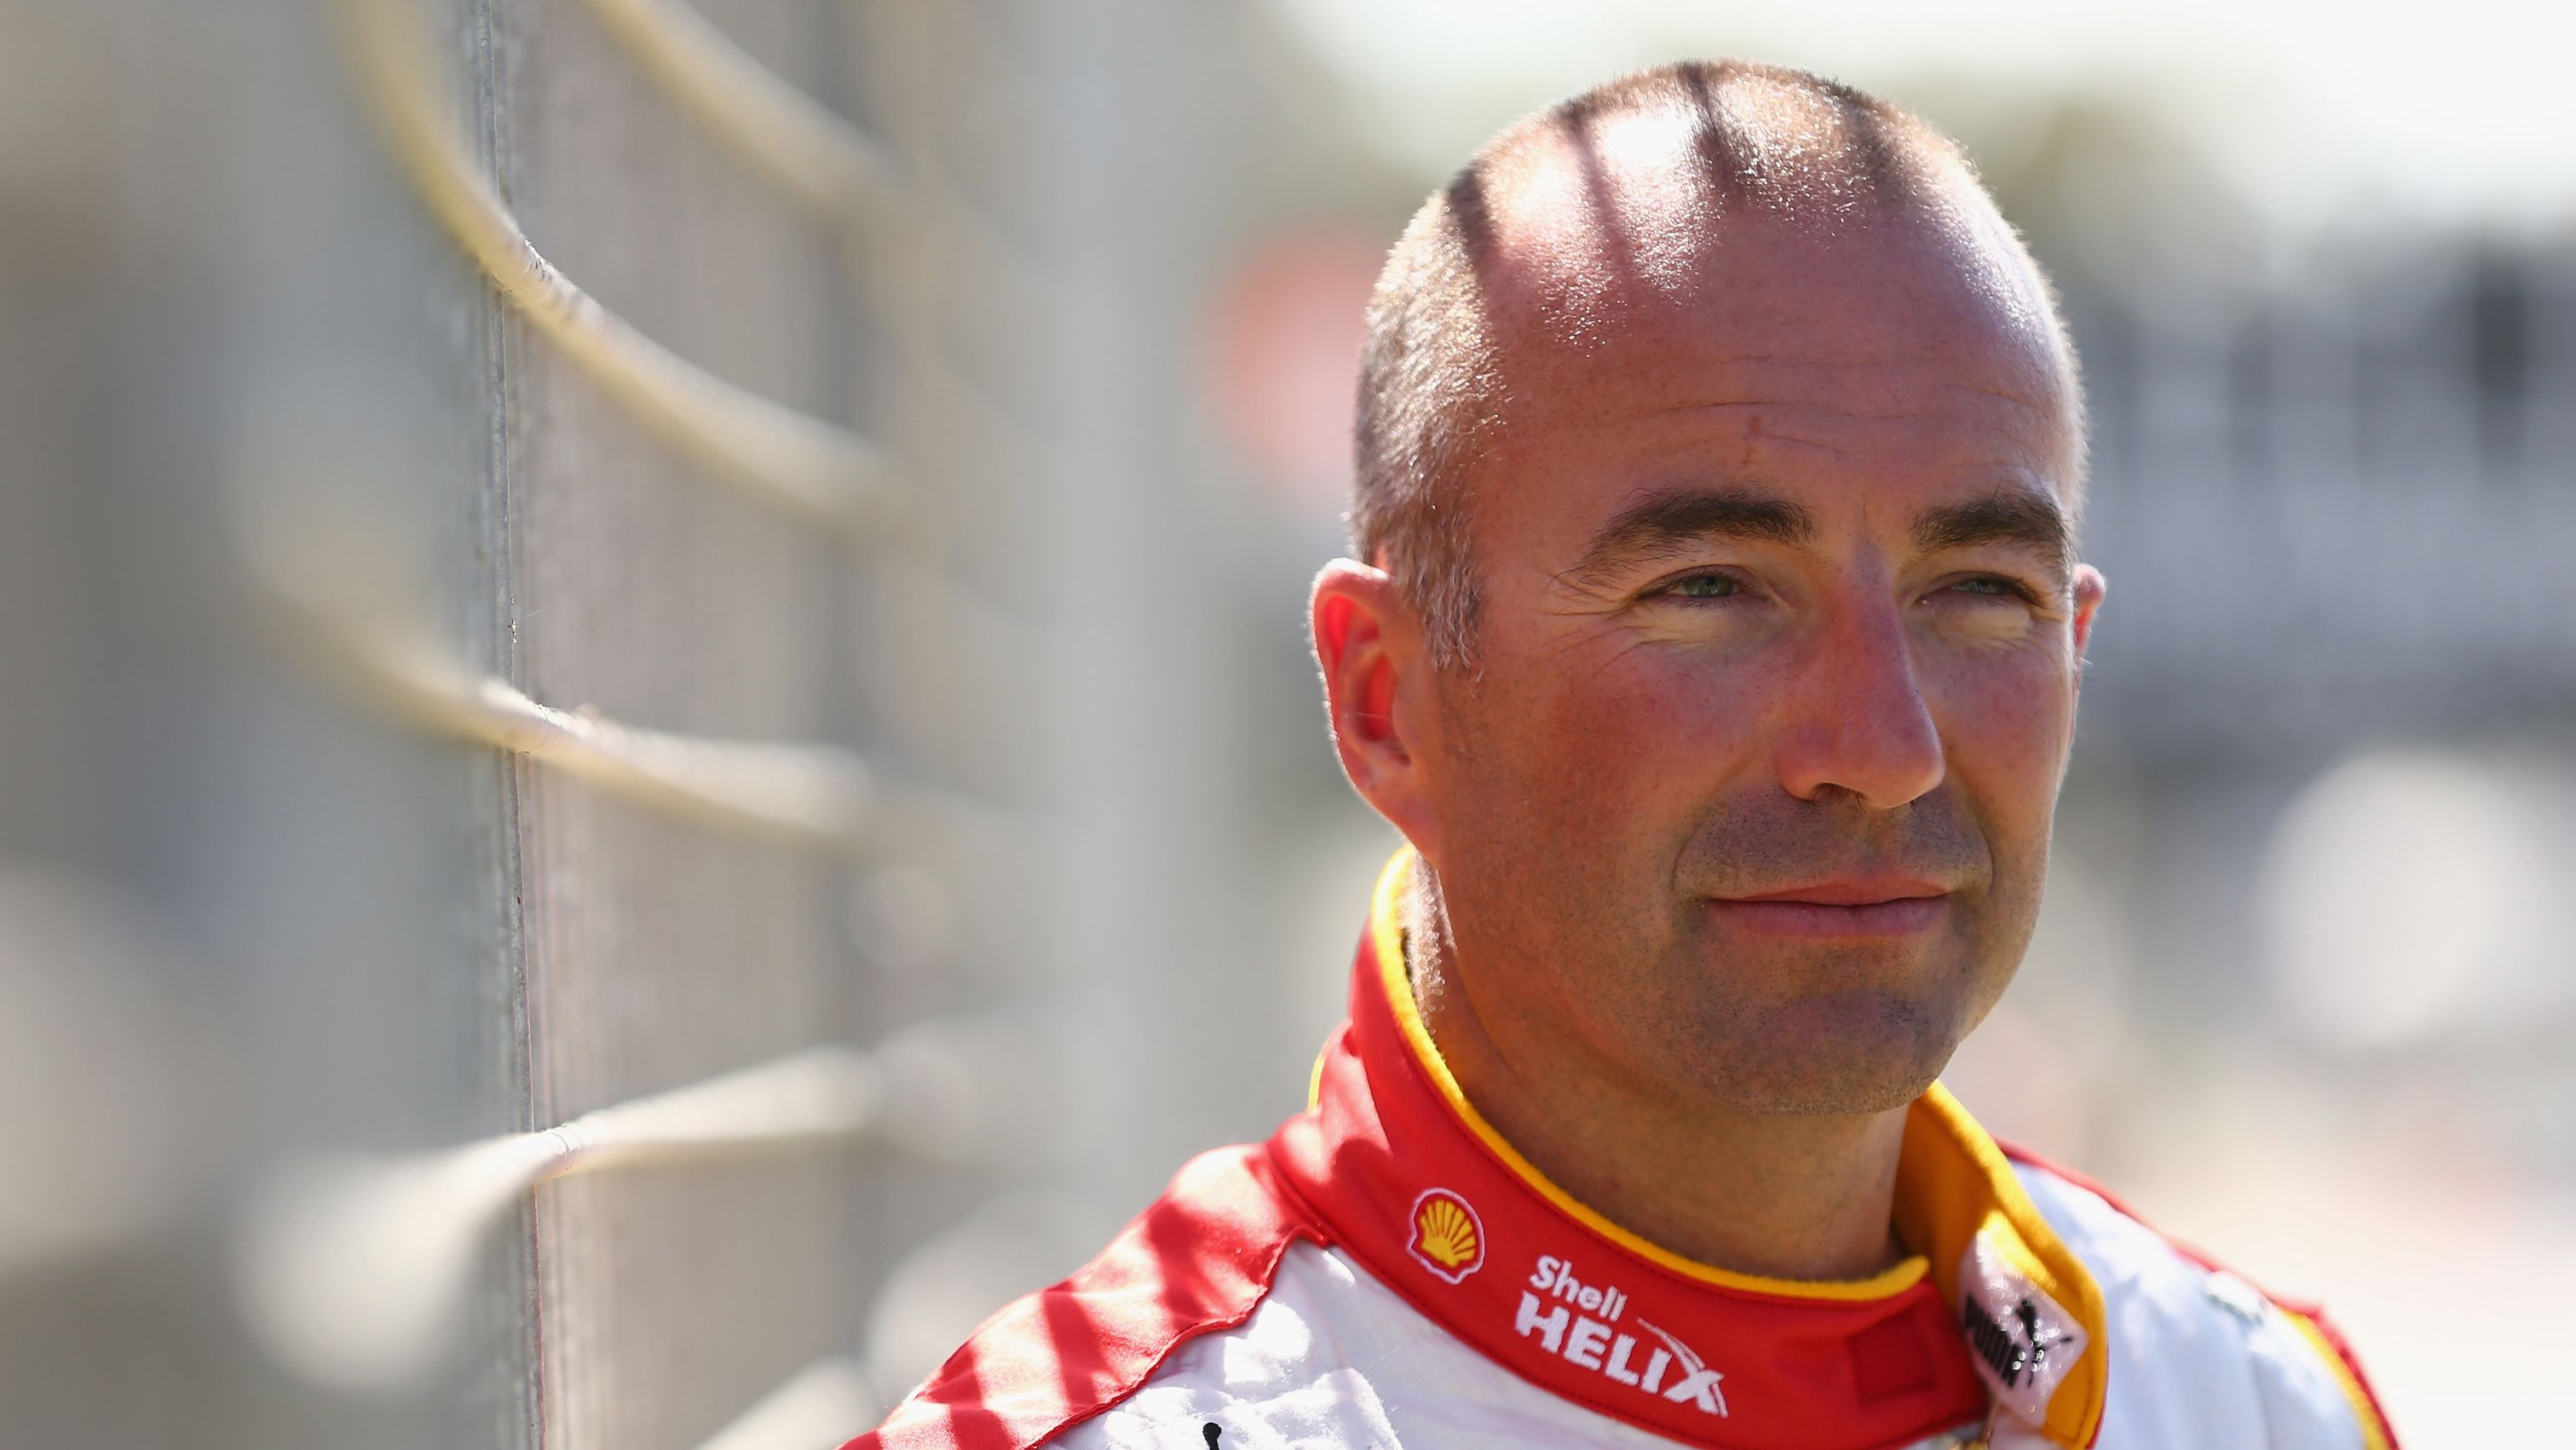 Marcos Ambrose last raced in Supercars in 2015.